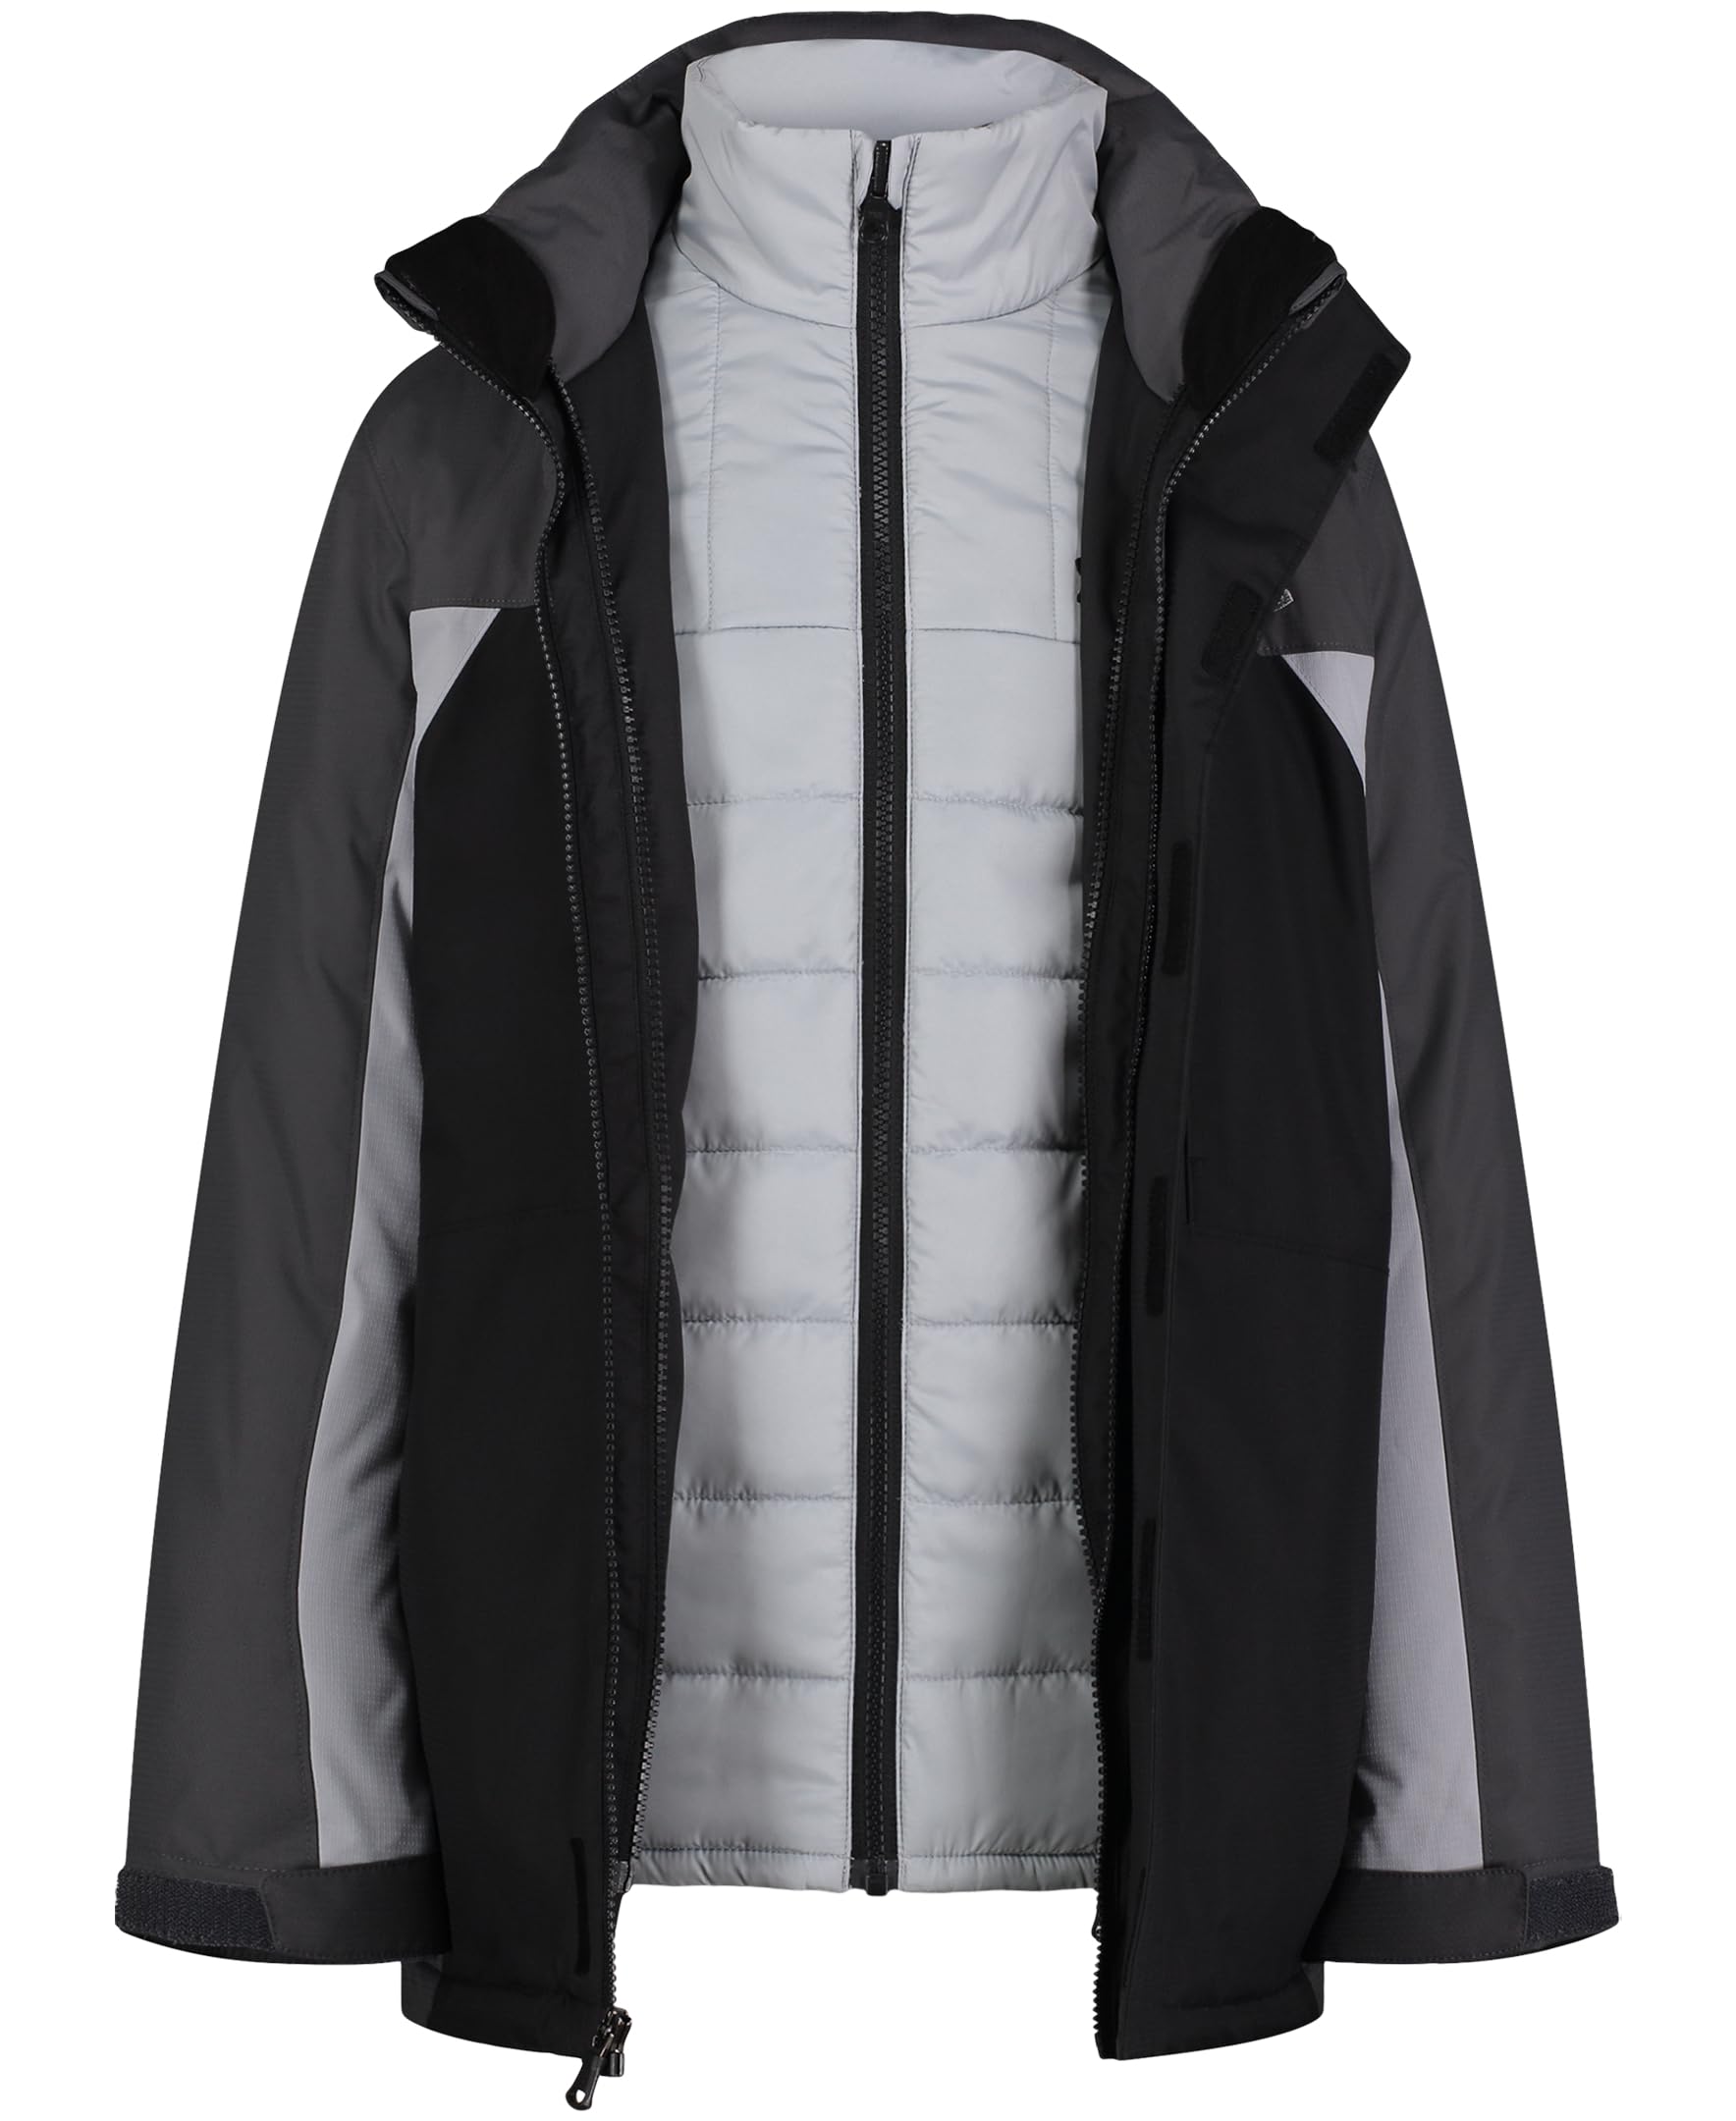 Under Armour Boys' Westward 3-in-1 Jacket, Removable Hood & Liner, Windproof & Water Repellant